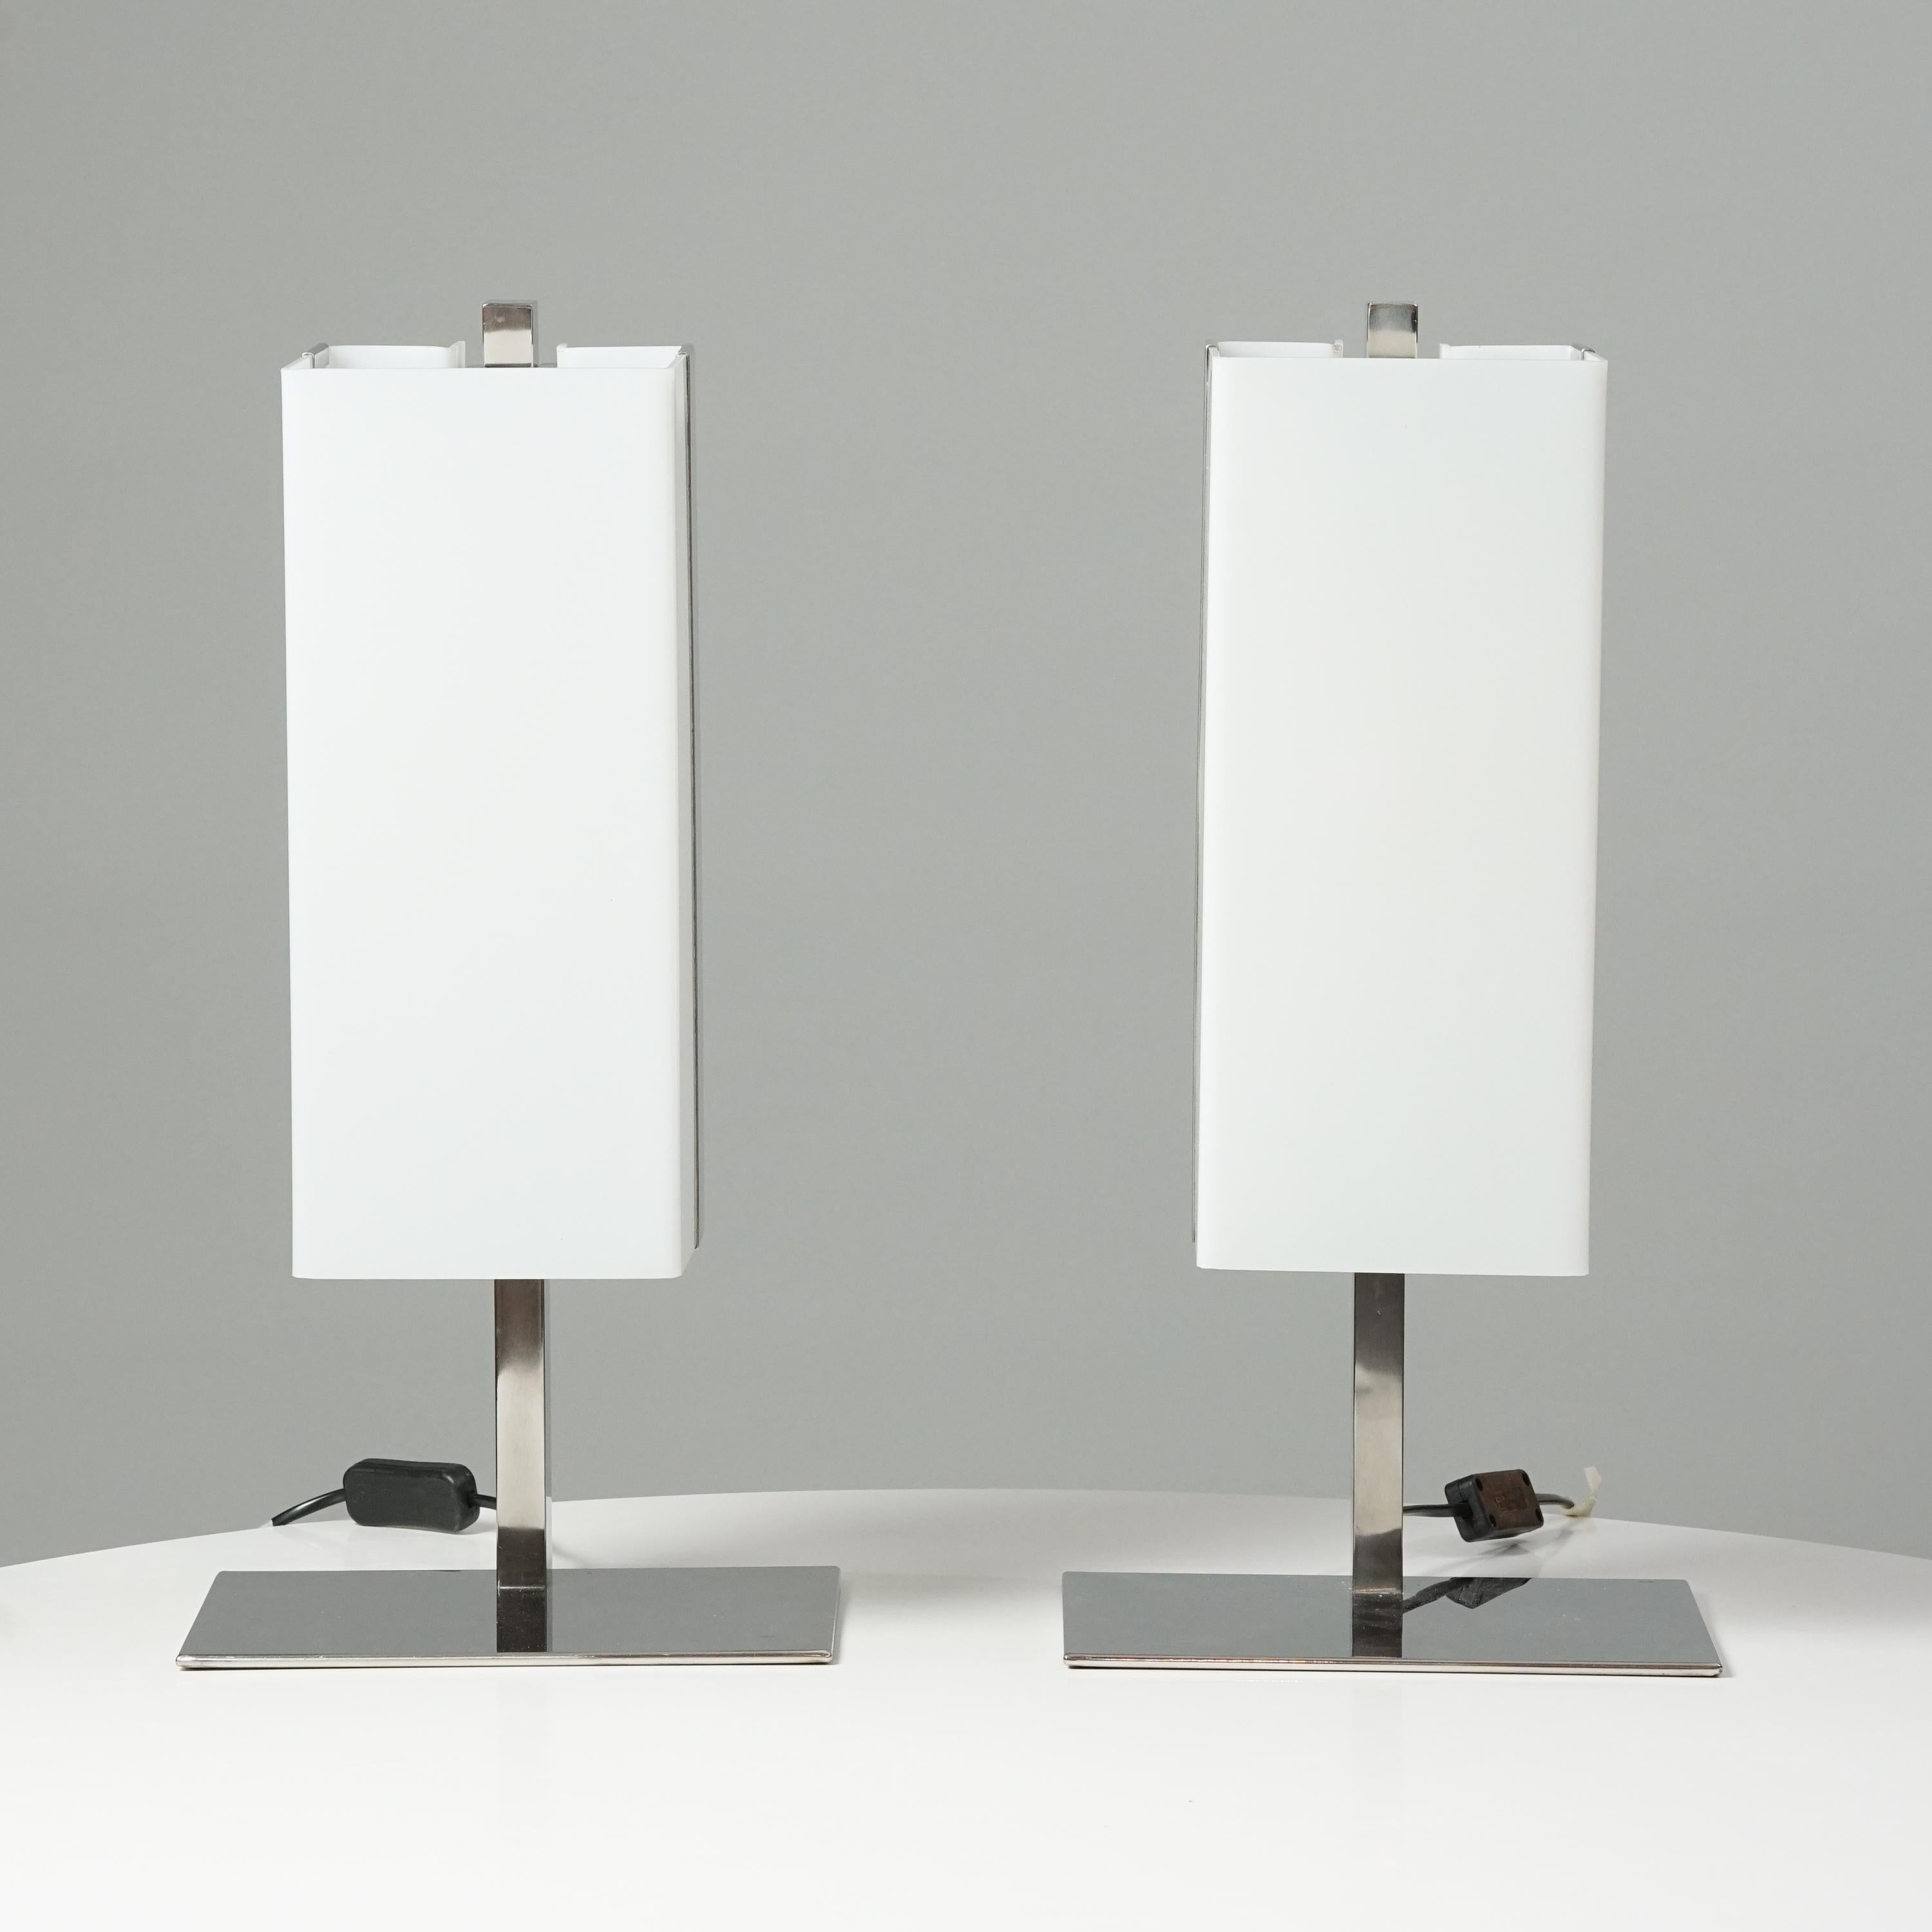 Pair of Table Lamps, designed by Lars-Gunnar Nordström, manufactured by Metallimestarit, 1970s. Marked. Metal frame with acrylic lamp shade. Good vintage condition, minor patina consistent with age and use. The table lamps are sold as a